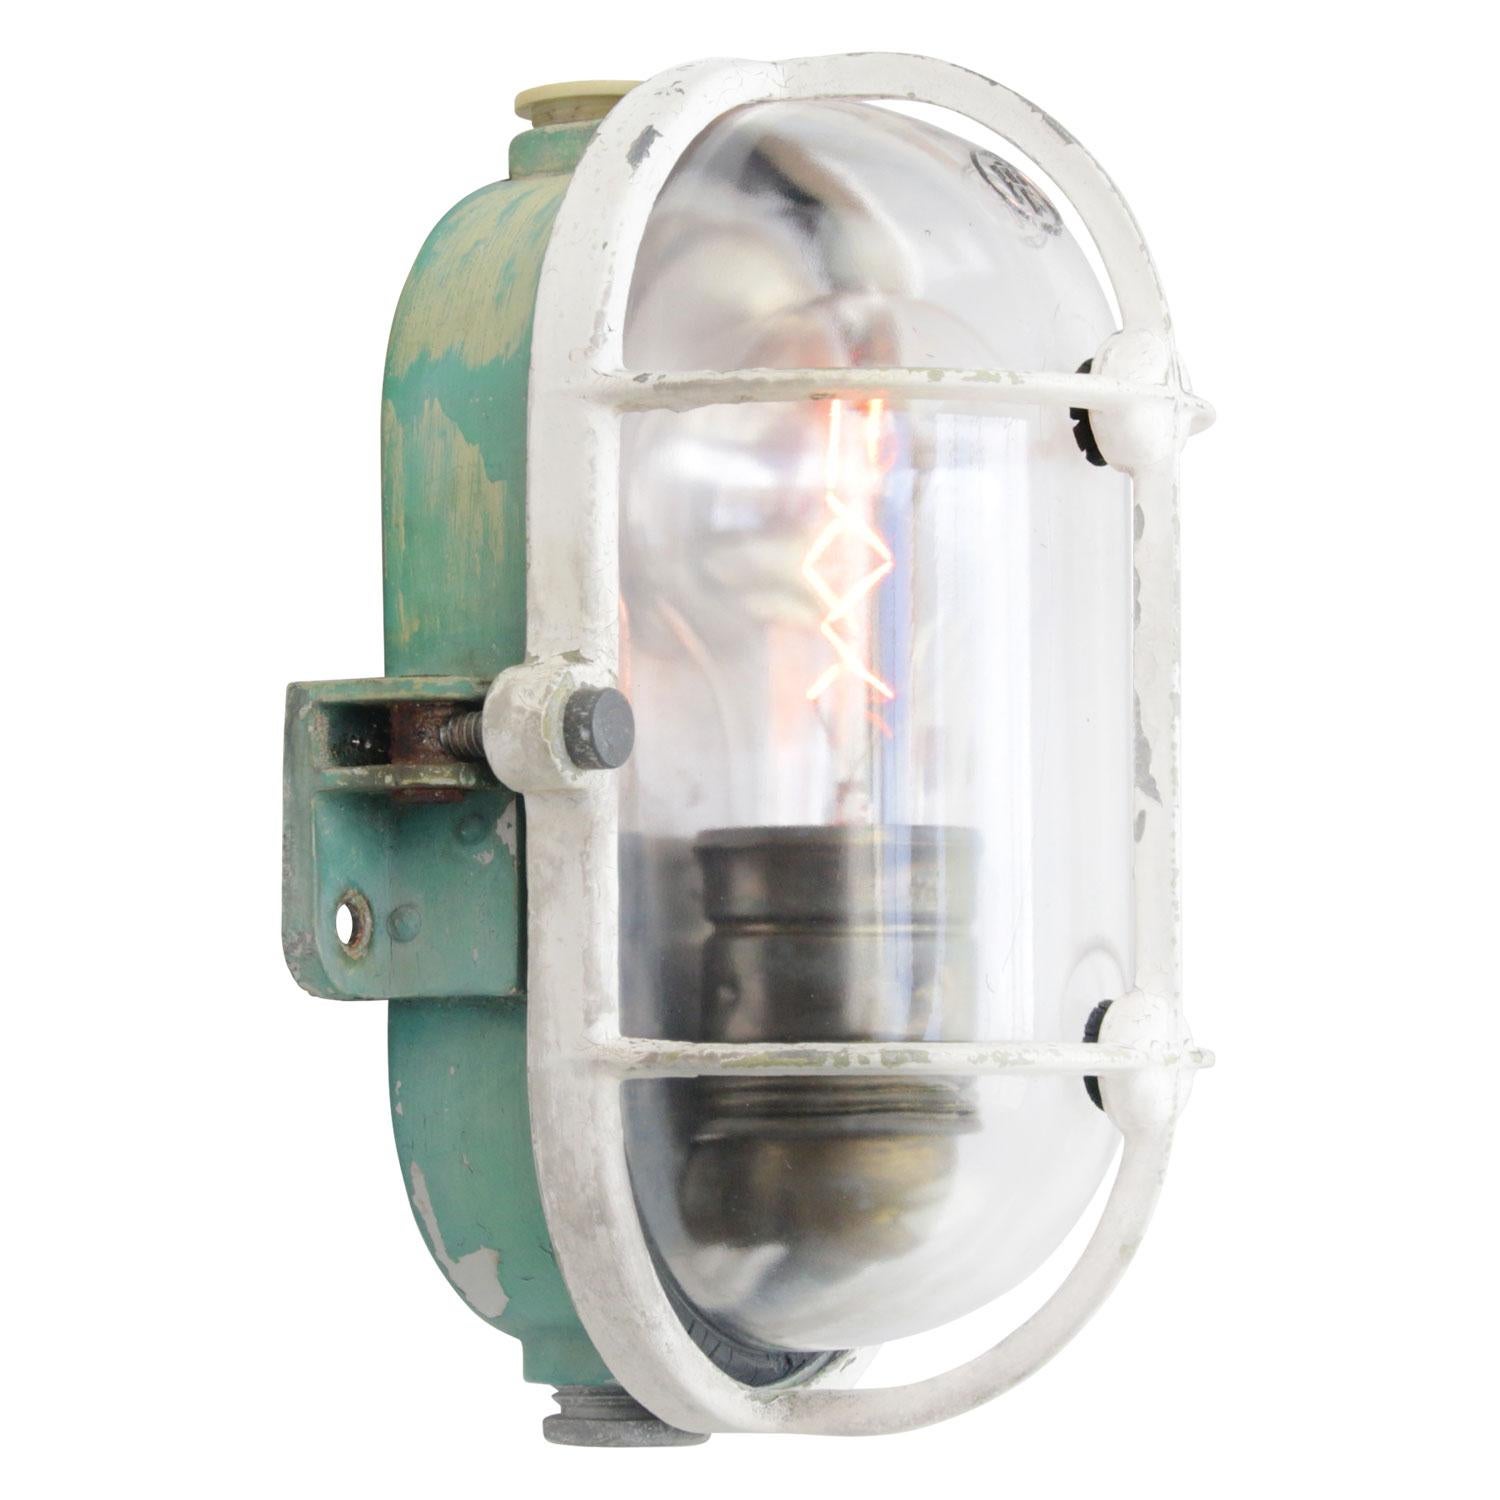 Industrial wall ceiling scone
Cast aluminum and clear glass

Weight: 0.90 kg / 2 lb

Priced per individual item. All lamps have been made suitable by international standards for incandescent light bulbs, energy-efficient and LED bulbs. E26/E27